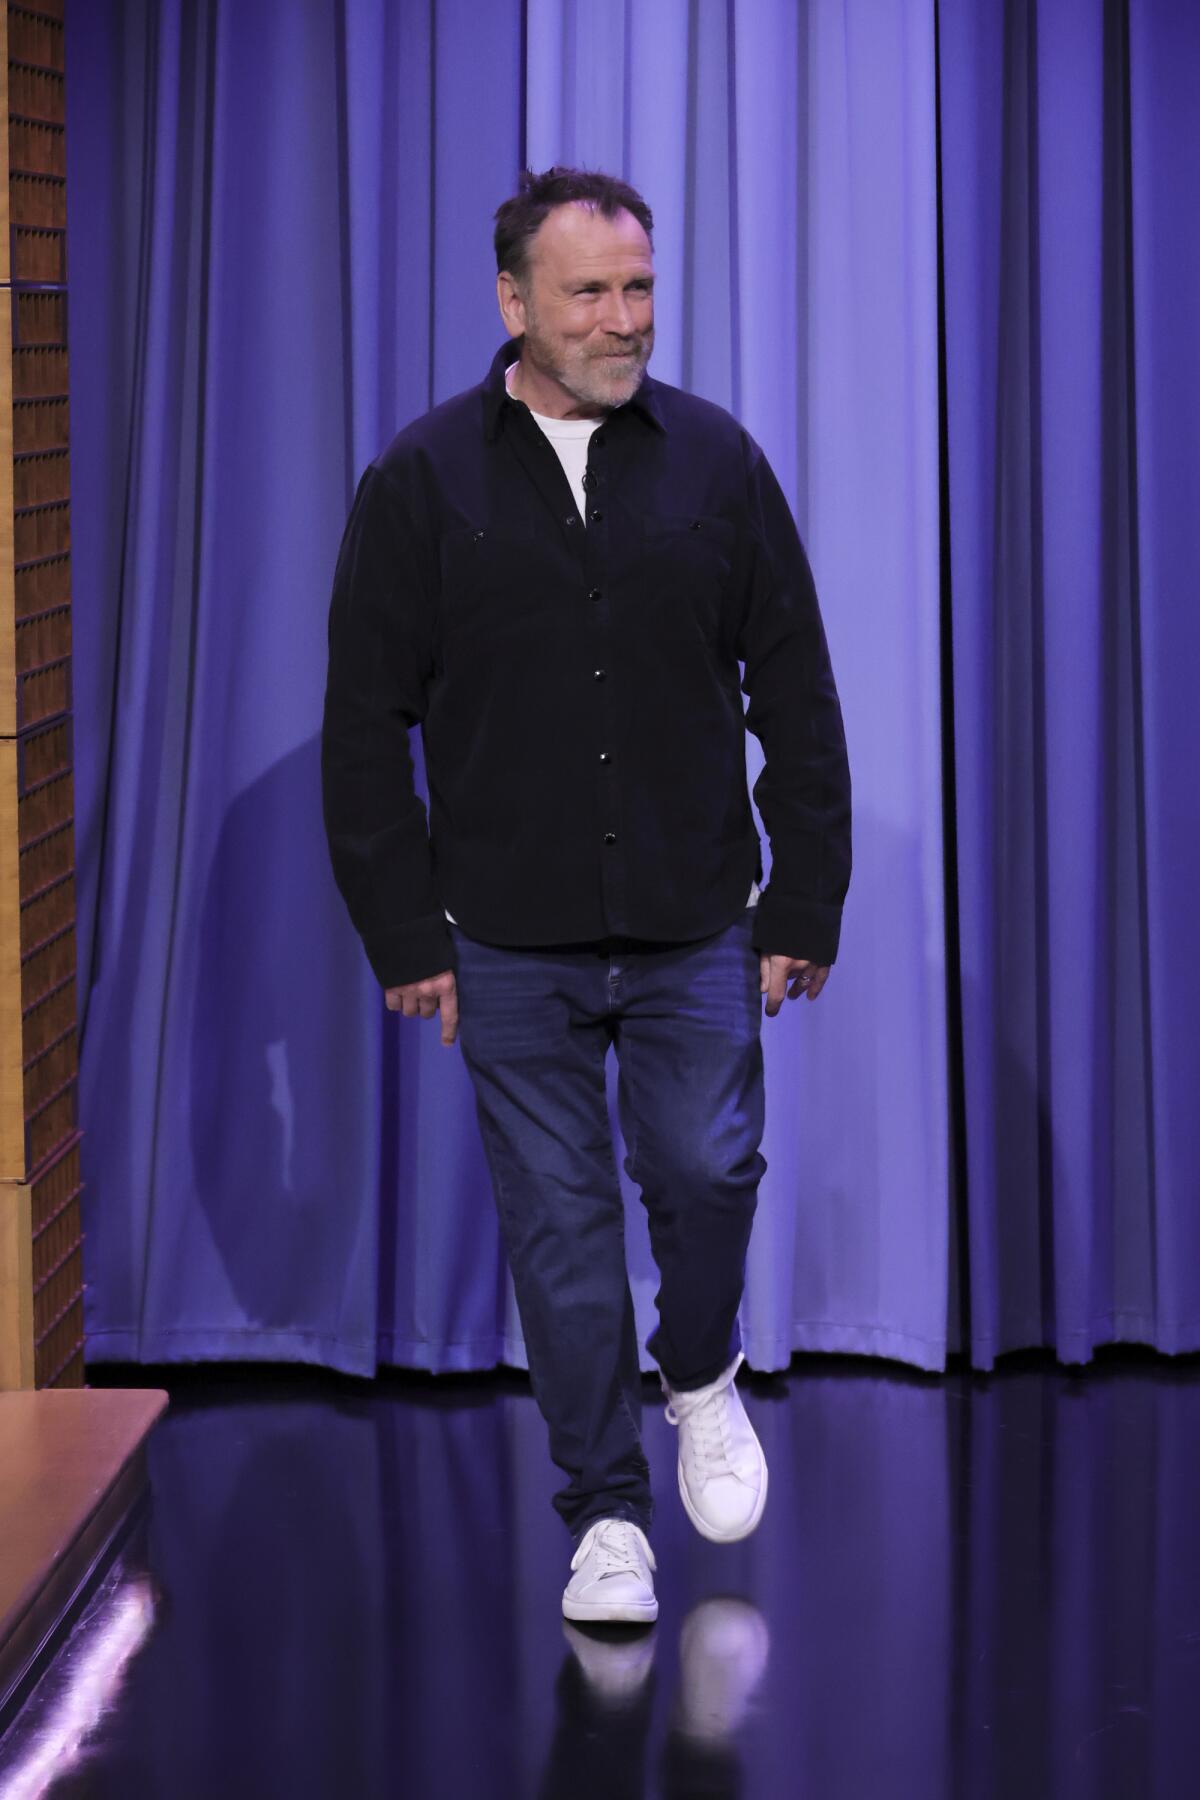 A man in jeans and a dark jacket walks onto a stage.